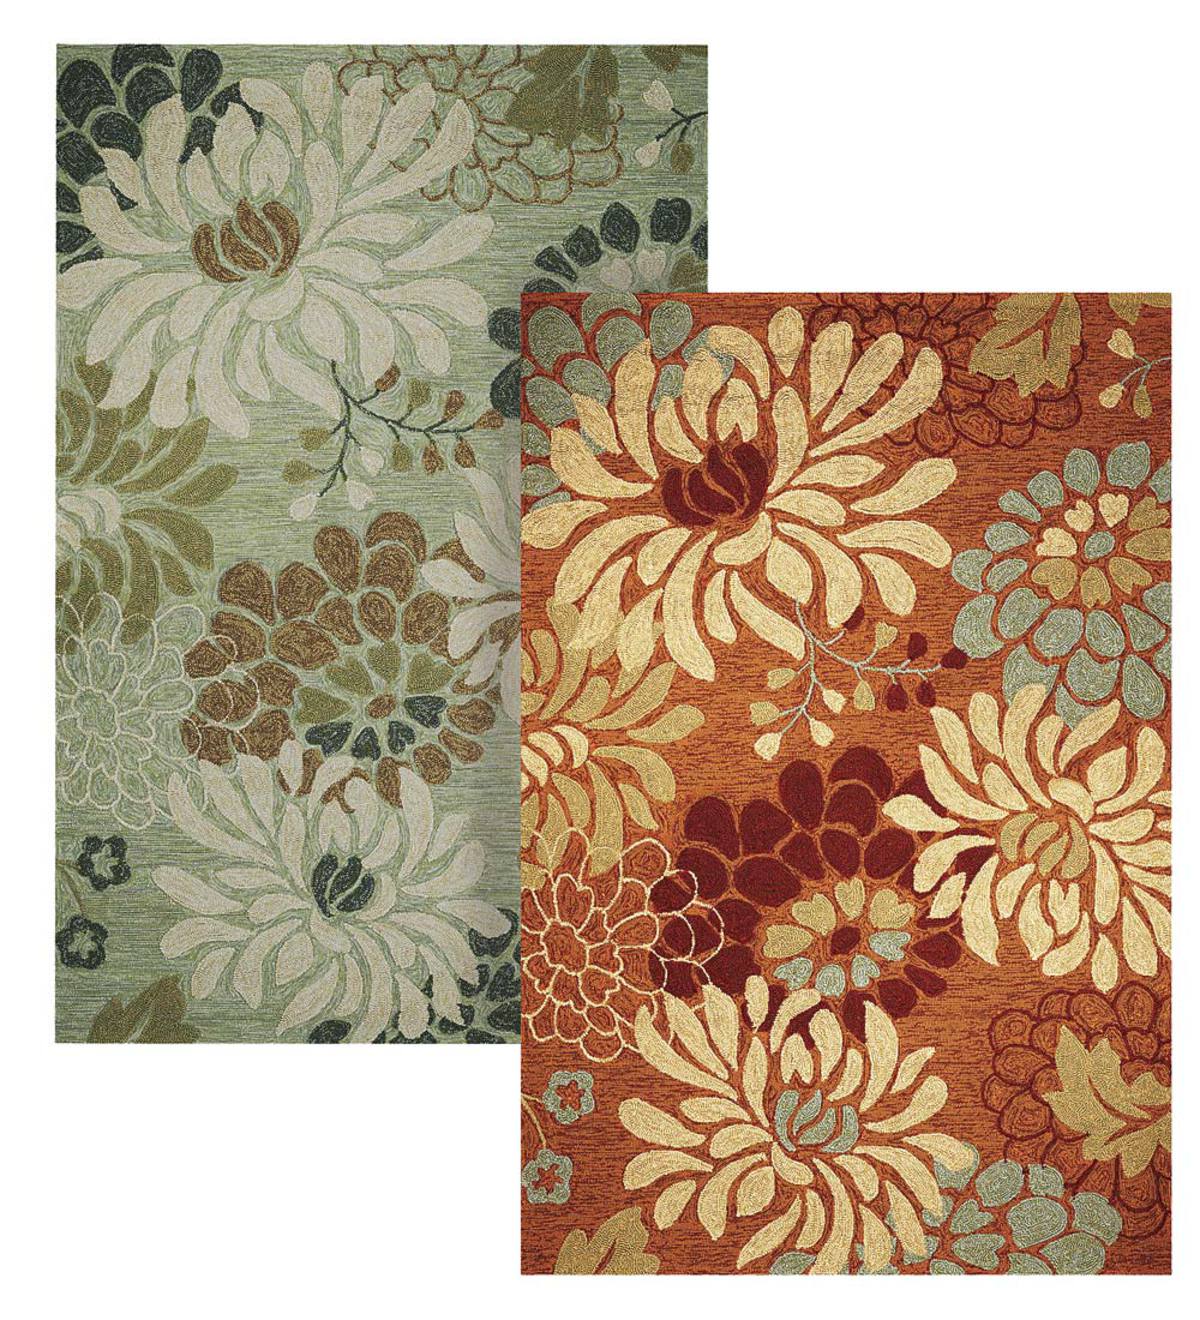 Floral Silhouette Rug, 5'"x 7'6"